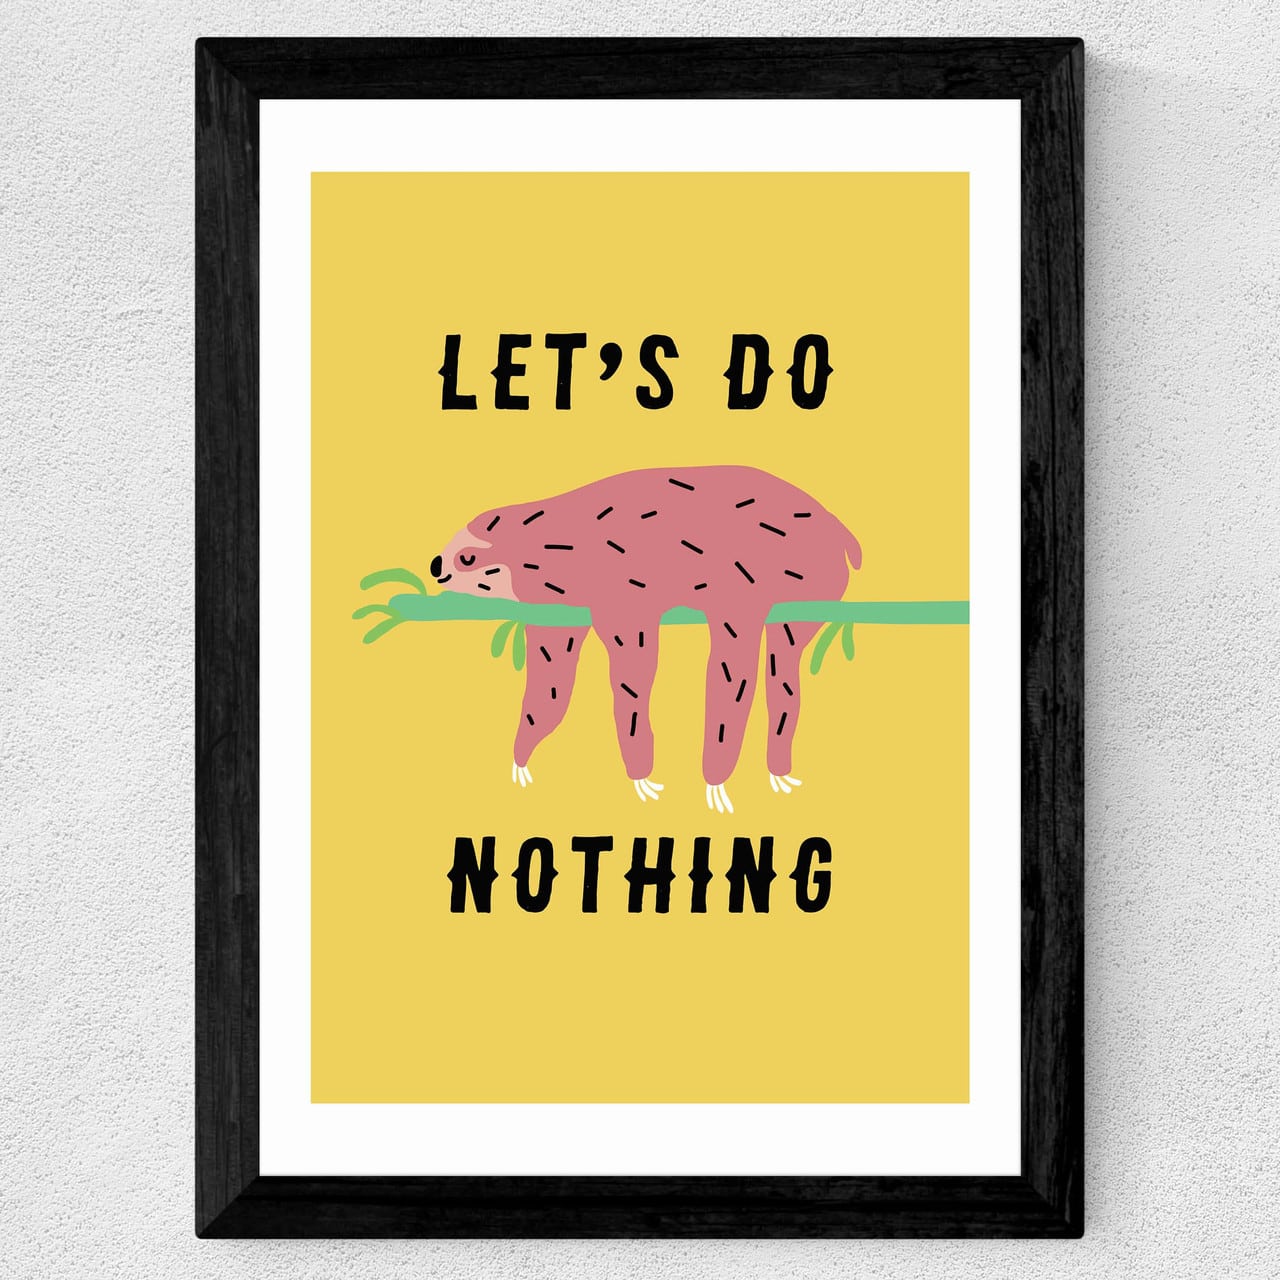 Sloth Framed Let's Do Nothing A3 Print